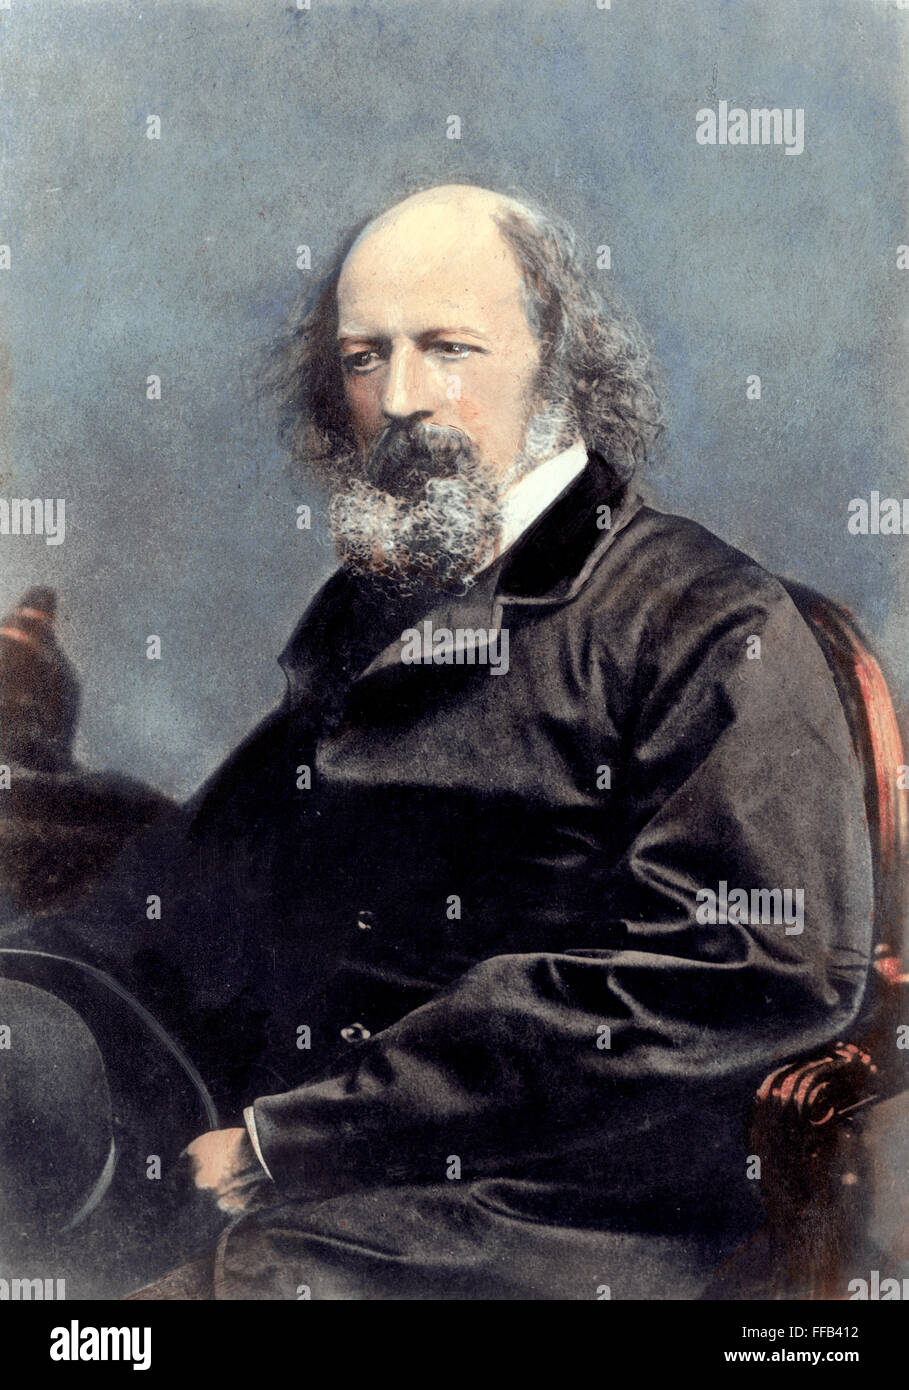 LORD ALFRED TENNYSON /n(1809-1892). English Baron and poet. Oil over a photograph, c1870. Stock Photo